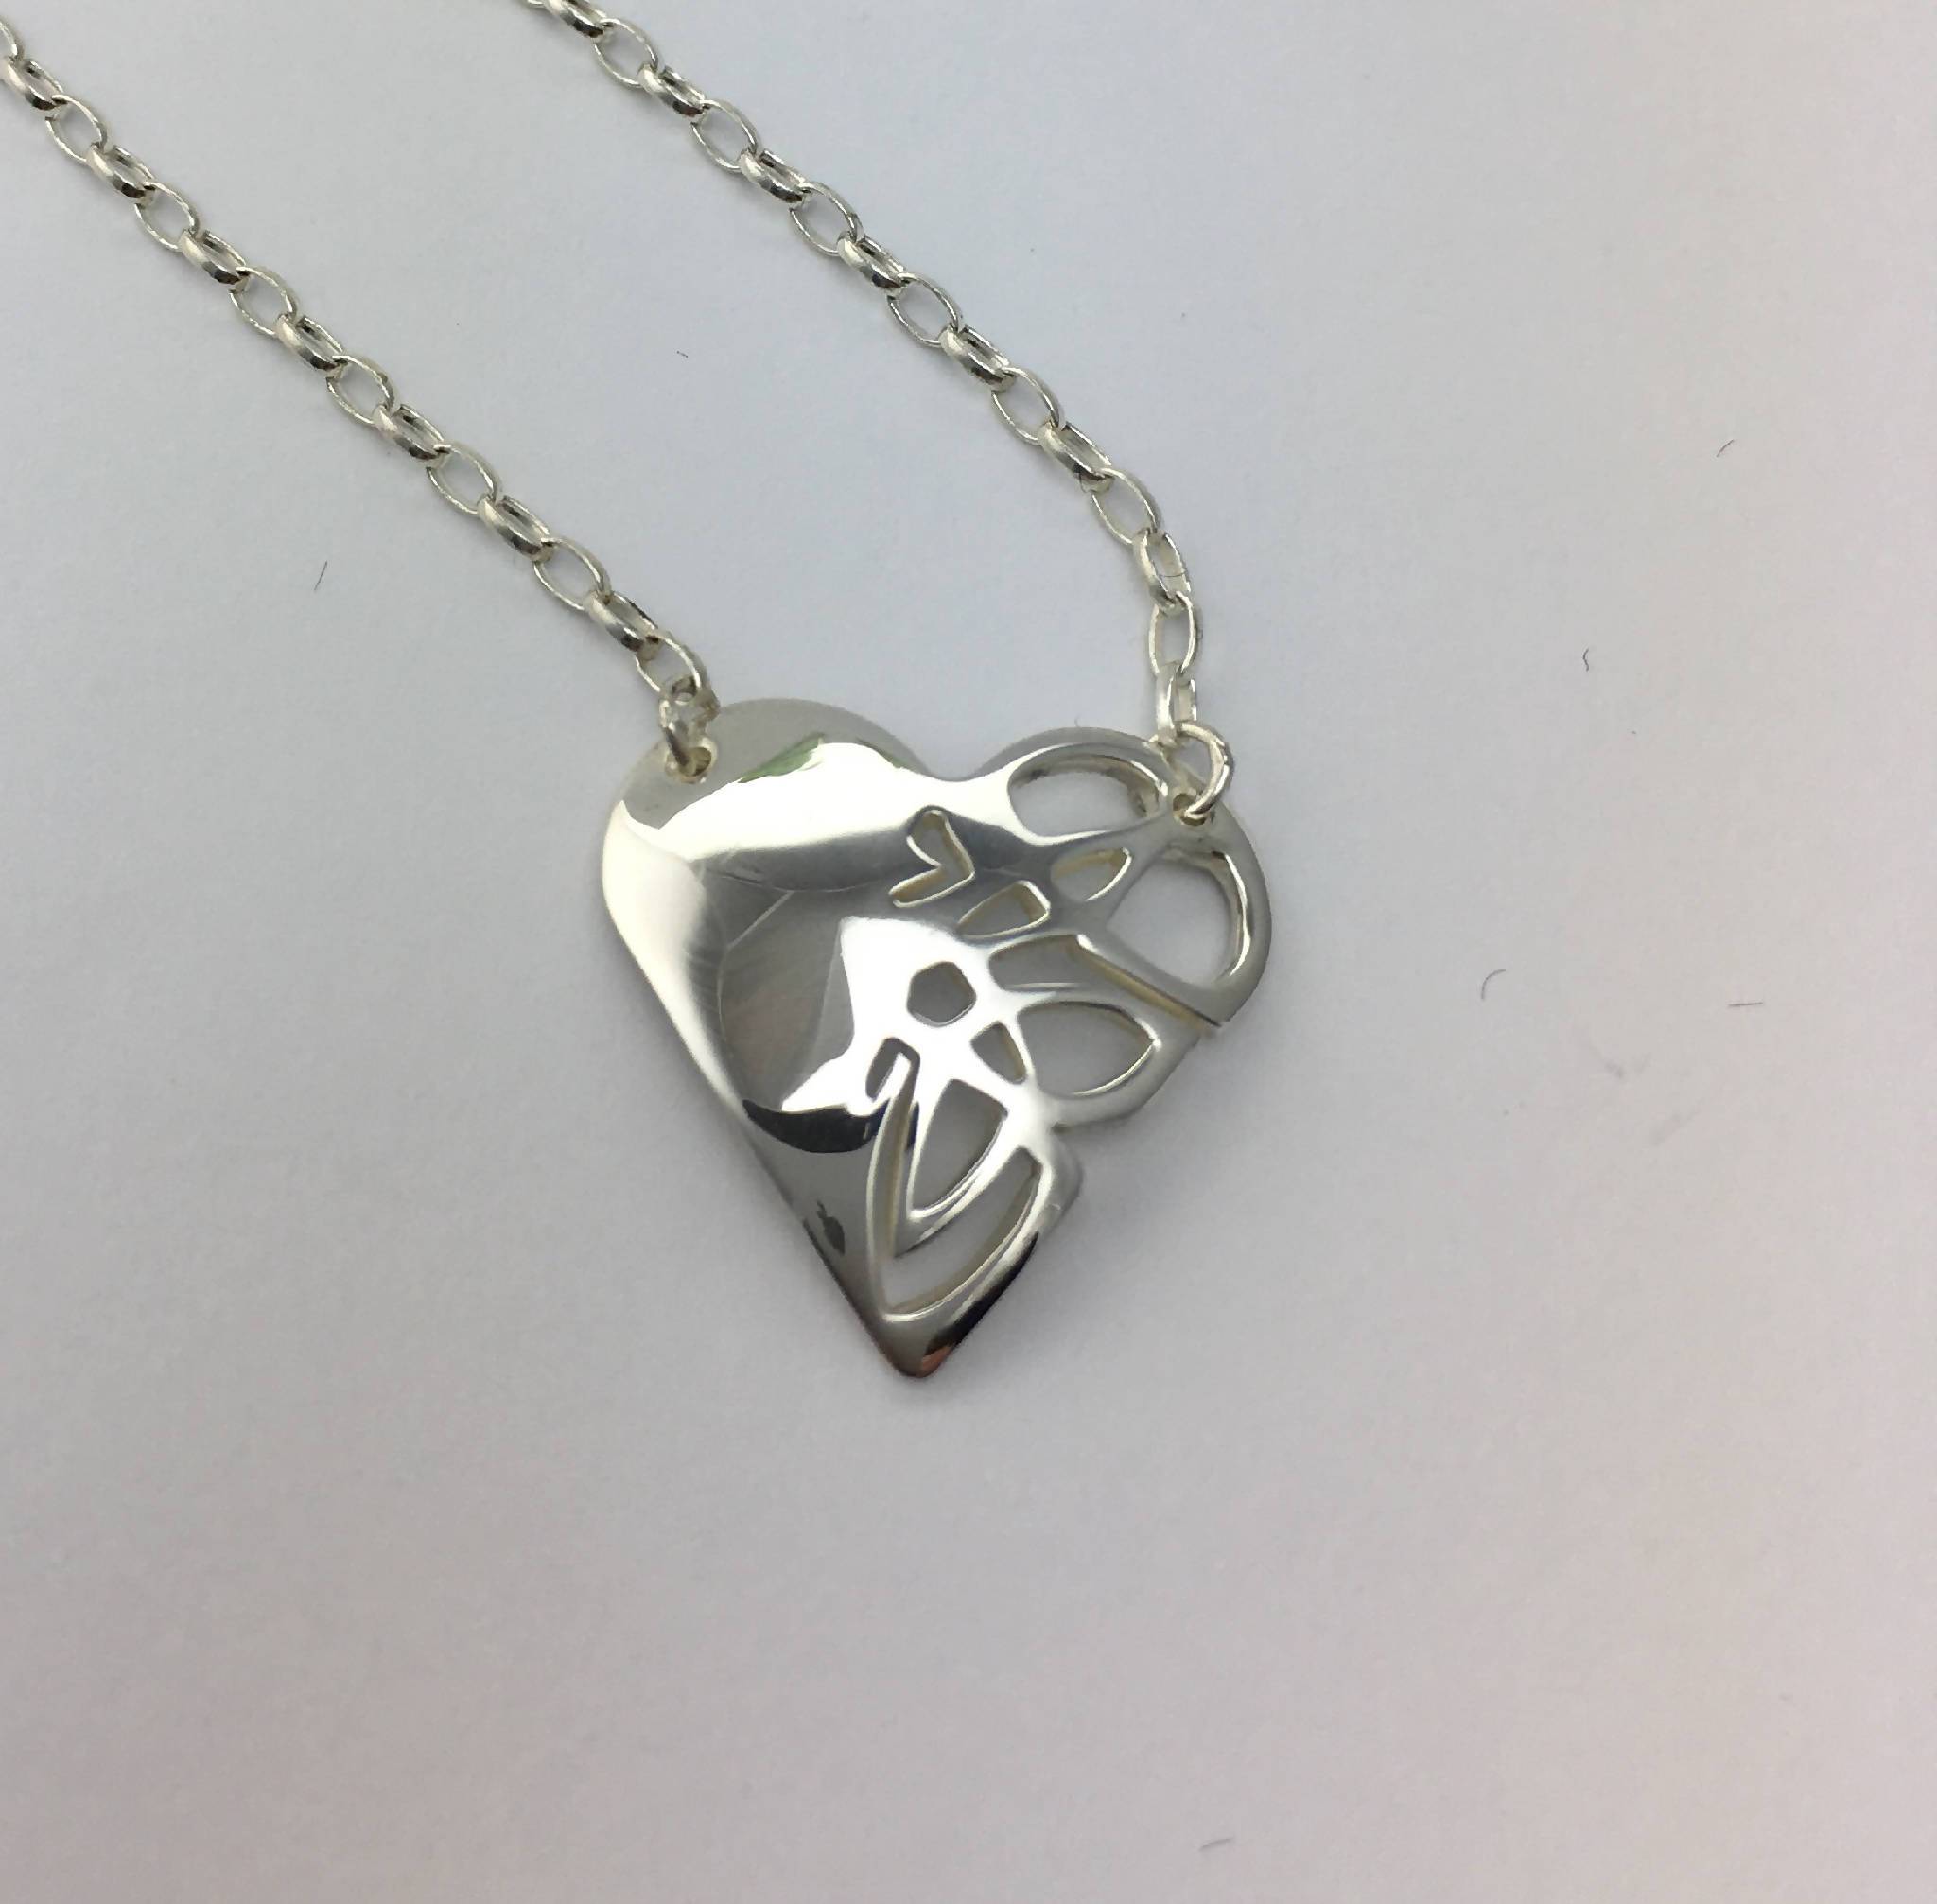 Small heart shaped pendant with Celtic knot design